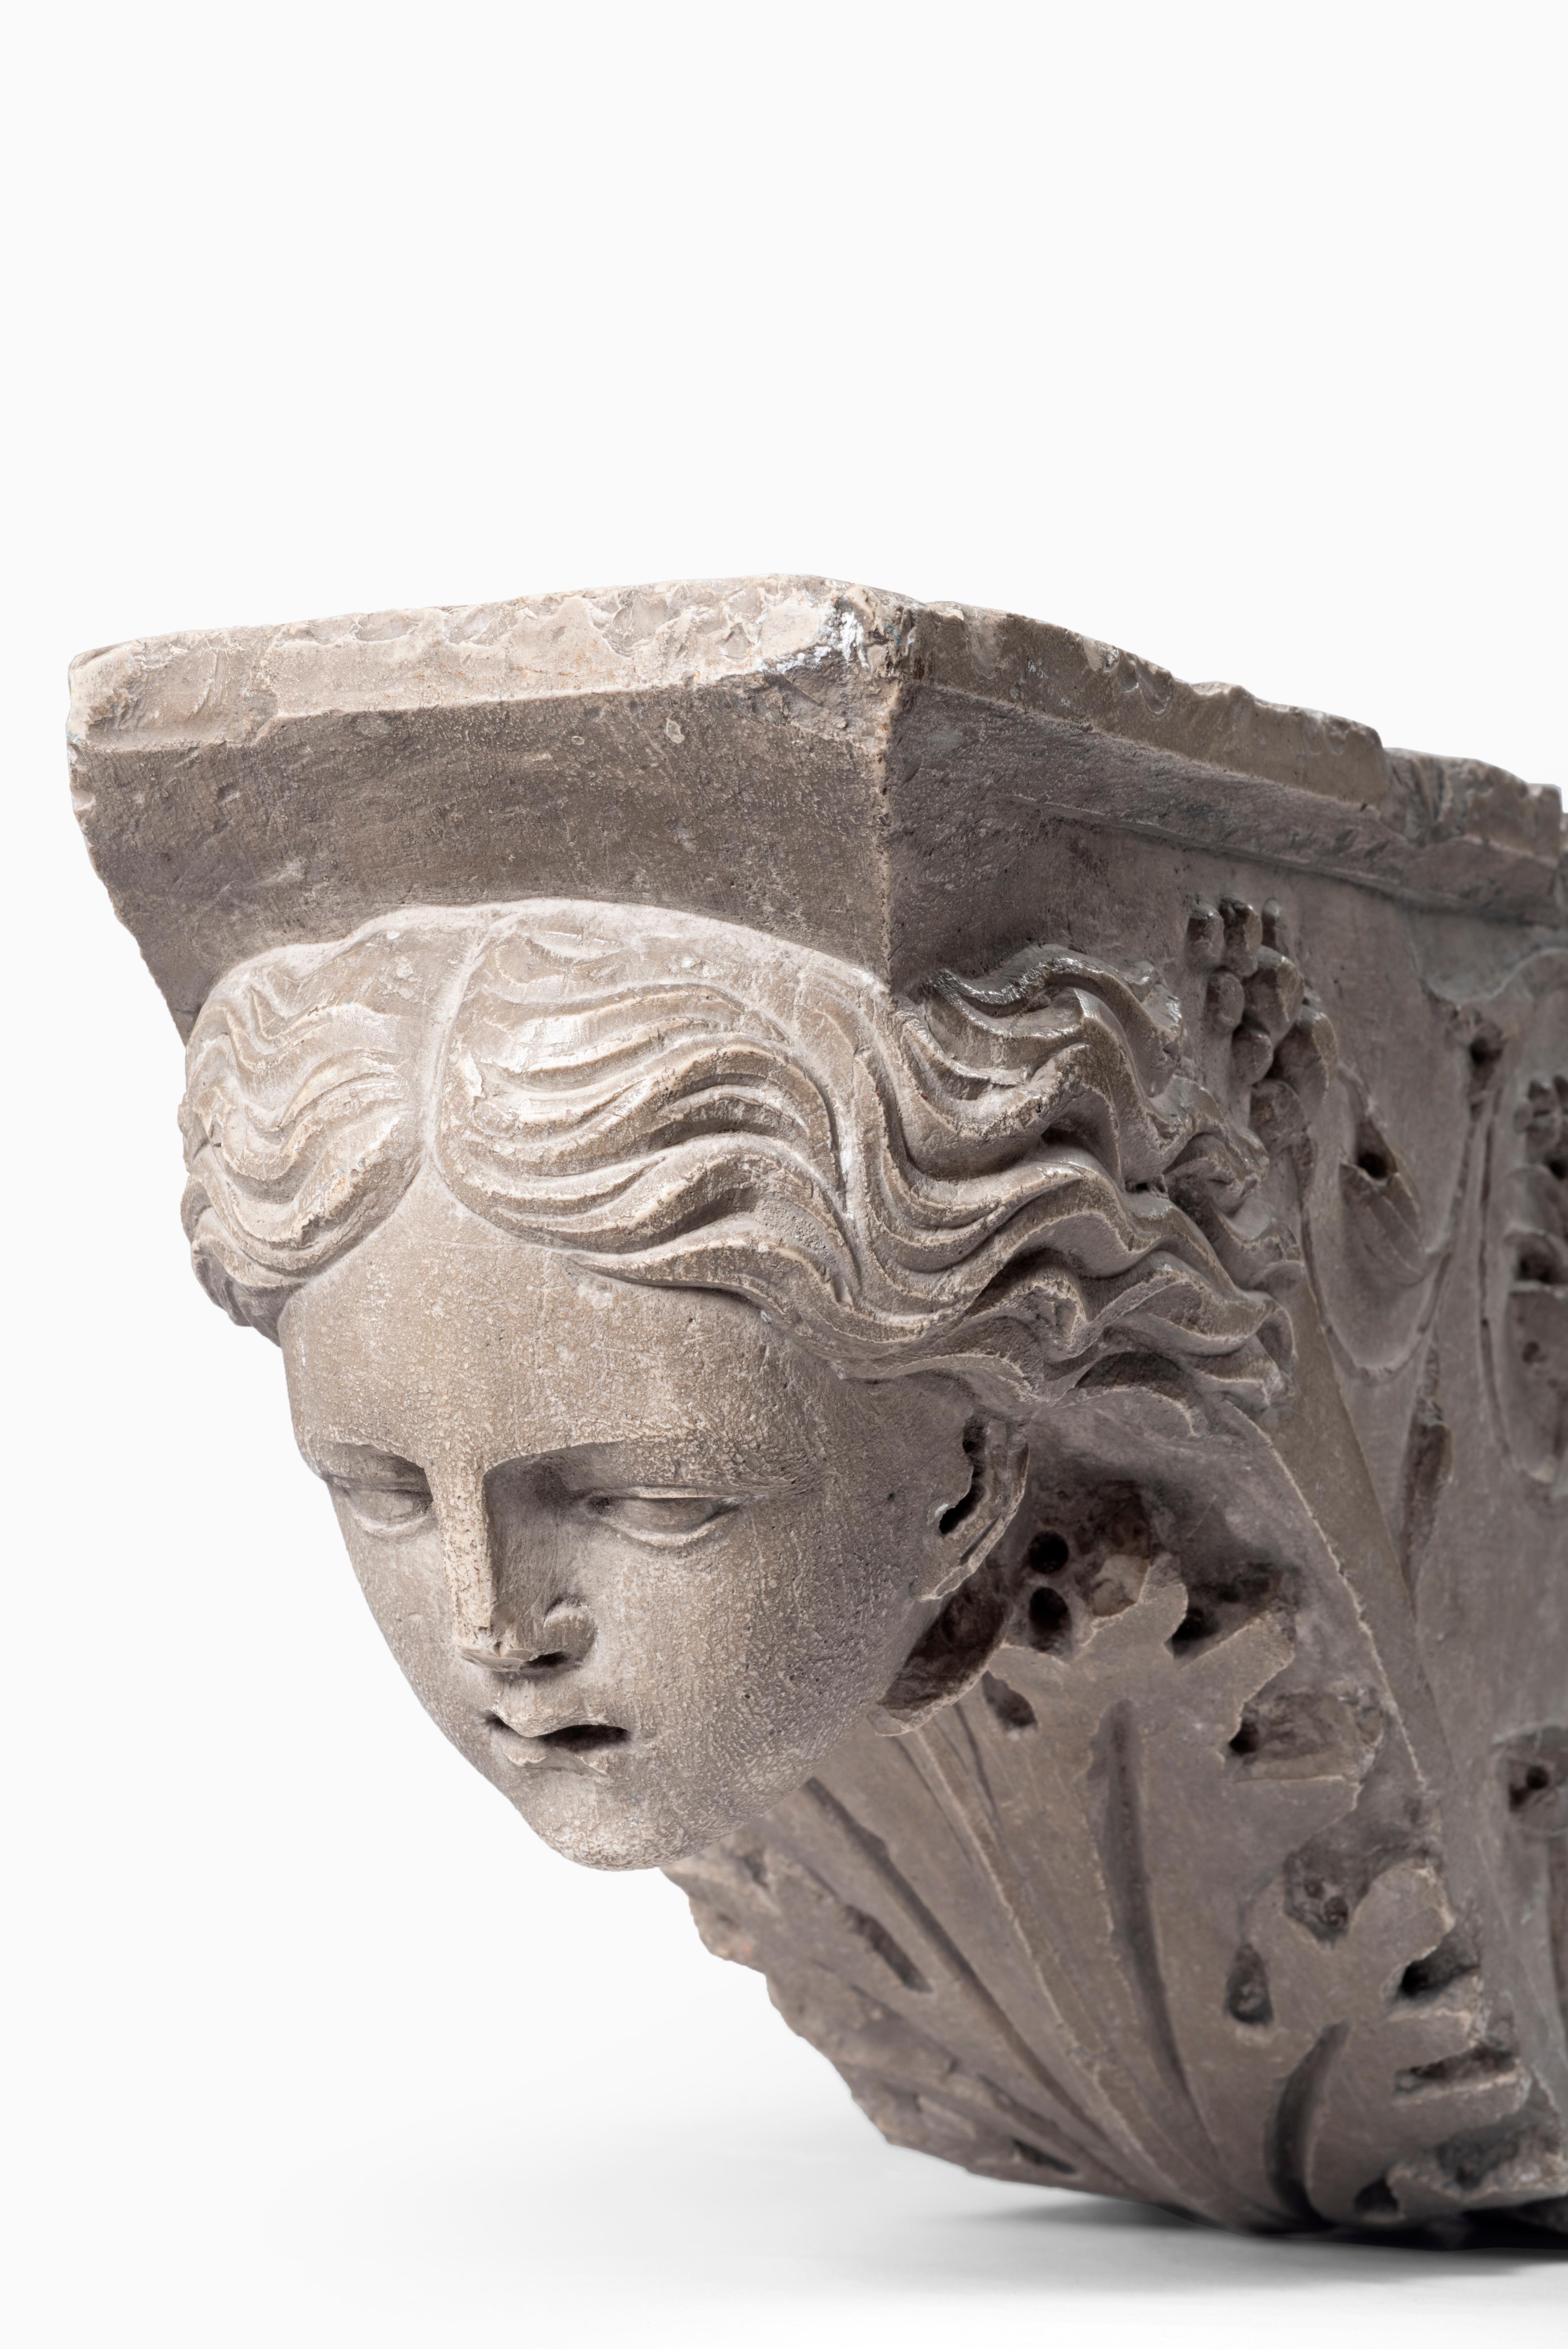 Richly decorated on the side and with finely sculpted female faces, these carved stone architectural brackets are a great example of the Tuscan production of the late 16th Century. Overall in good condition, Italian works of this type are quite rare